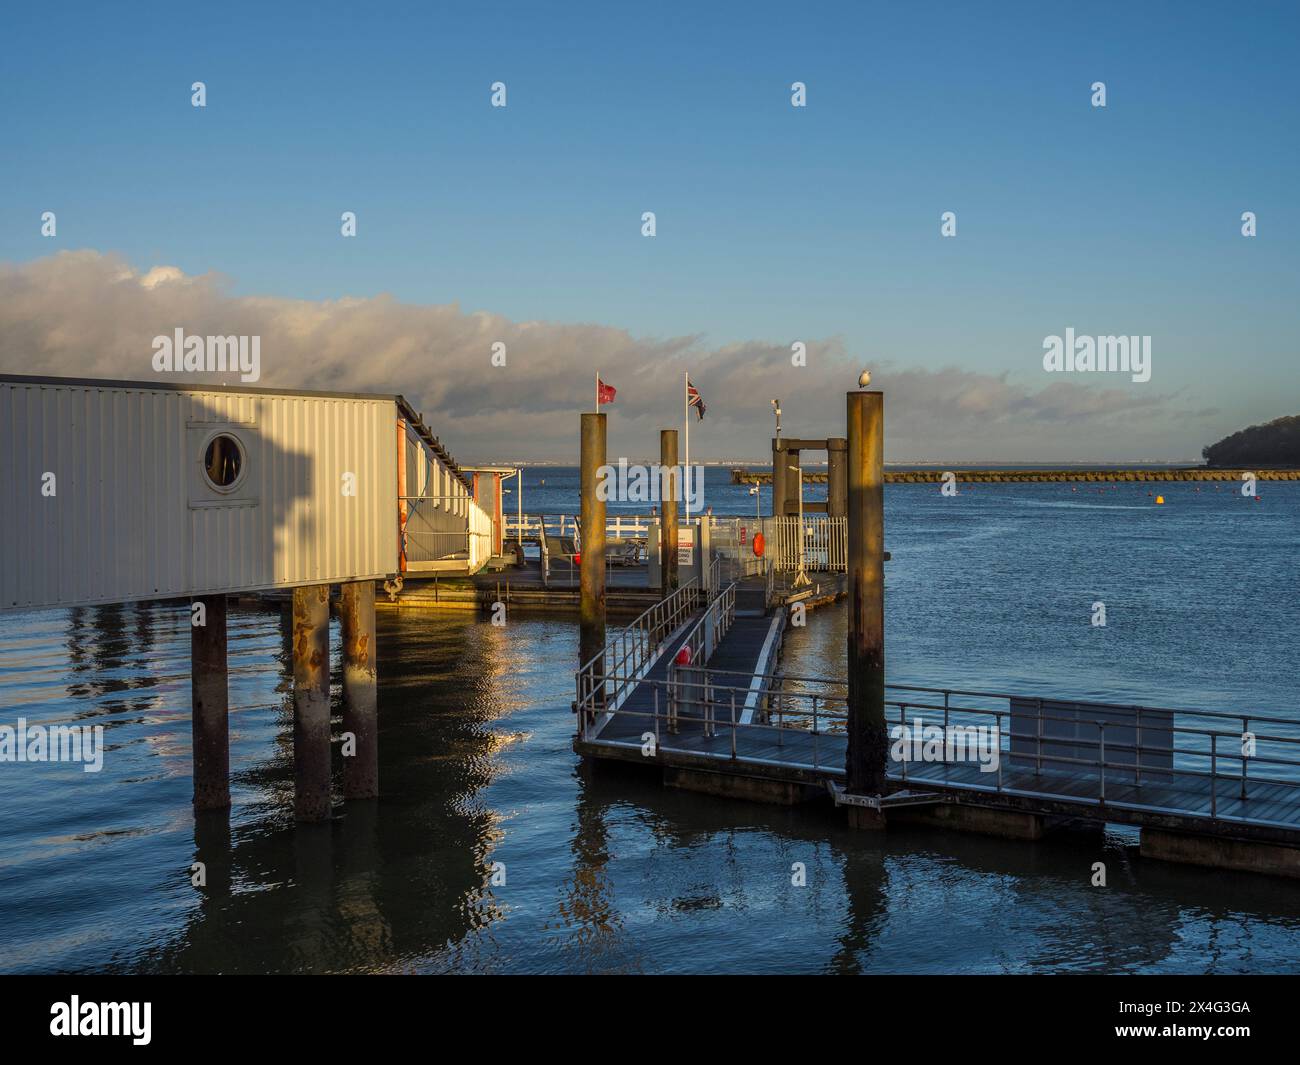 Jetty for the Red Jet, Cowes Harbour, Cowes, Isle of Wight, England, UK, GB. Stock Photo